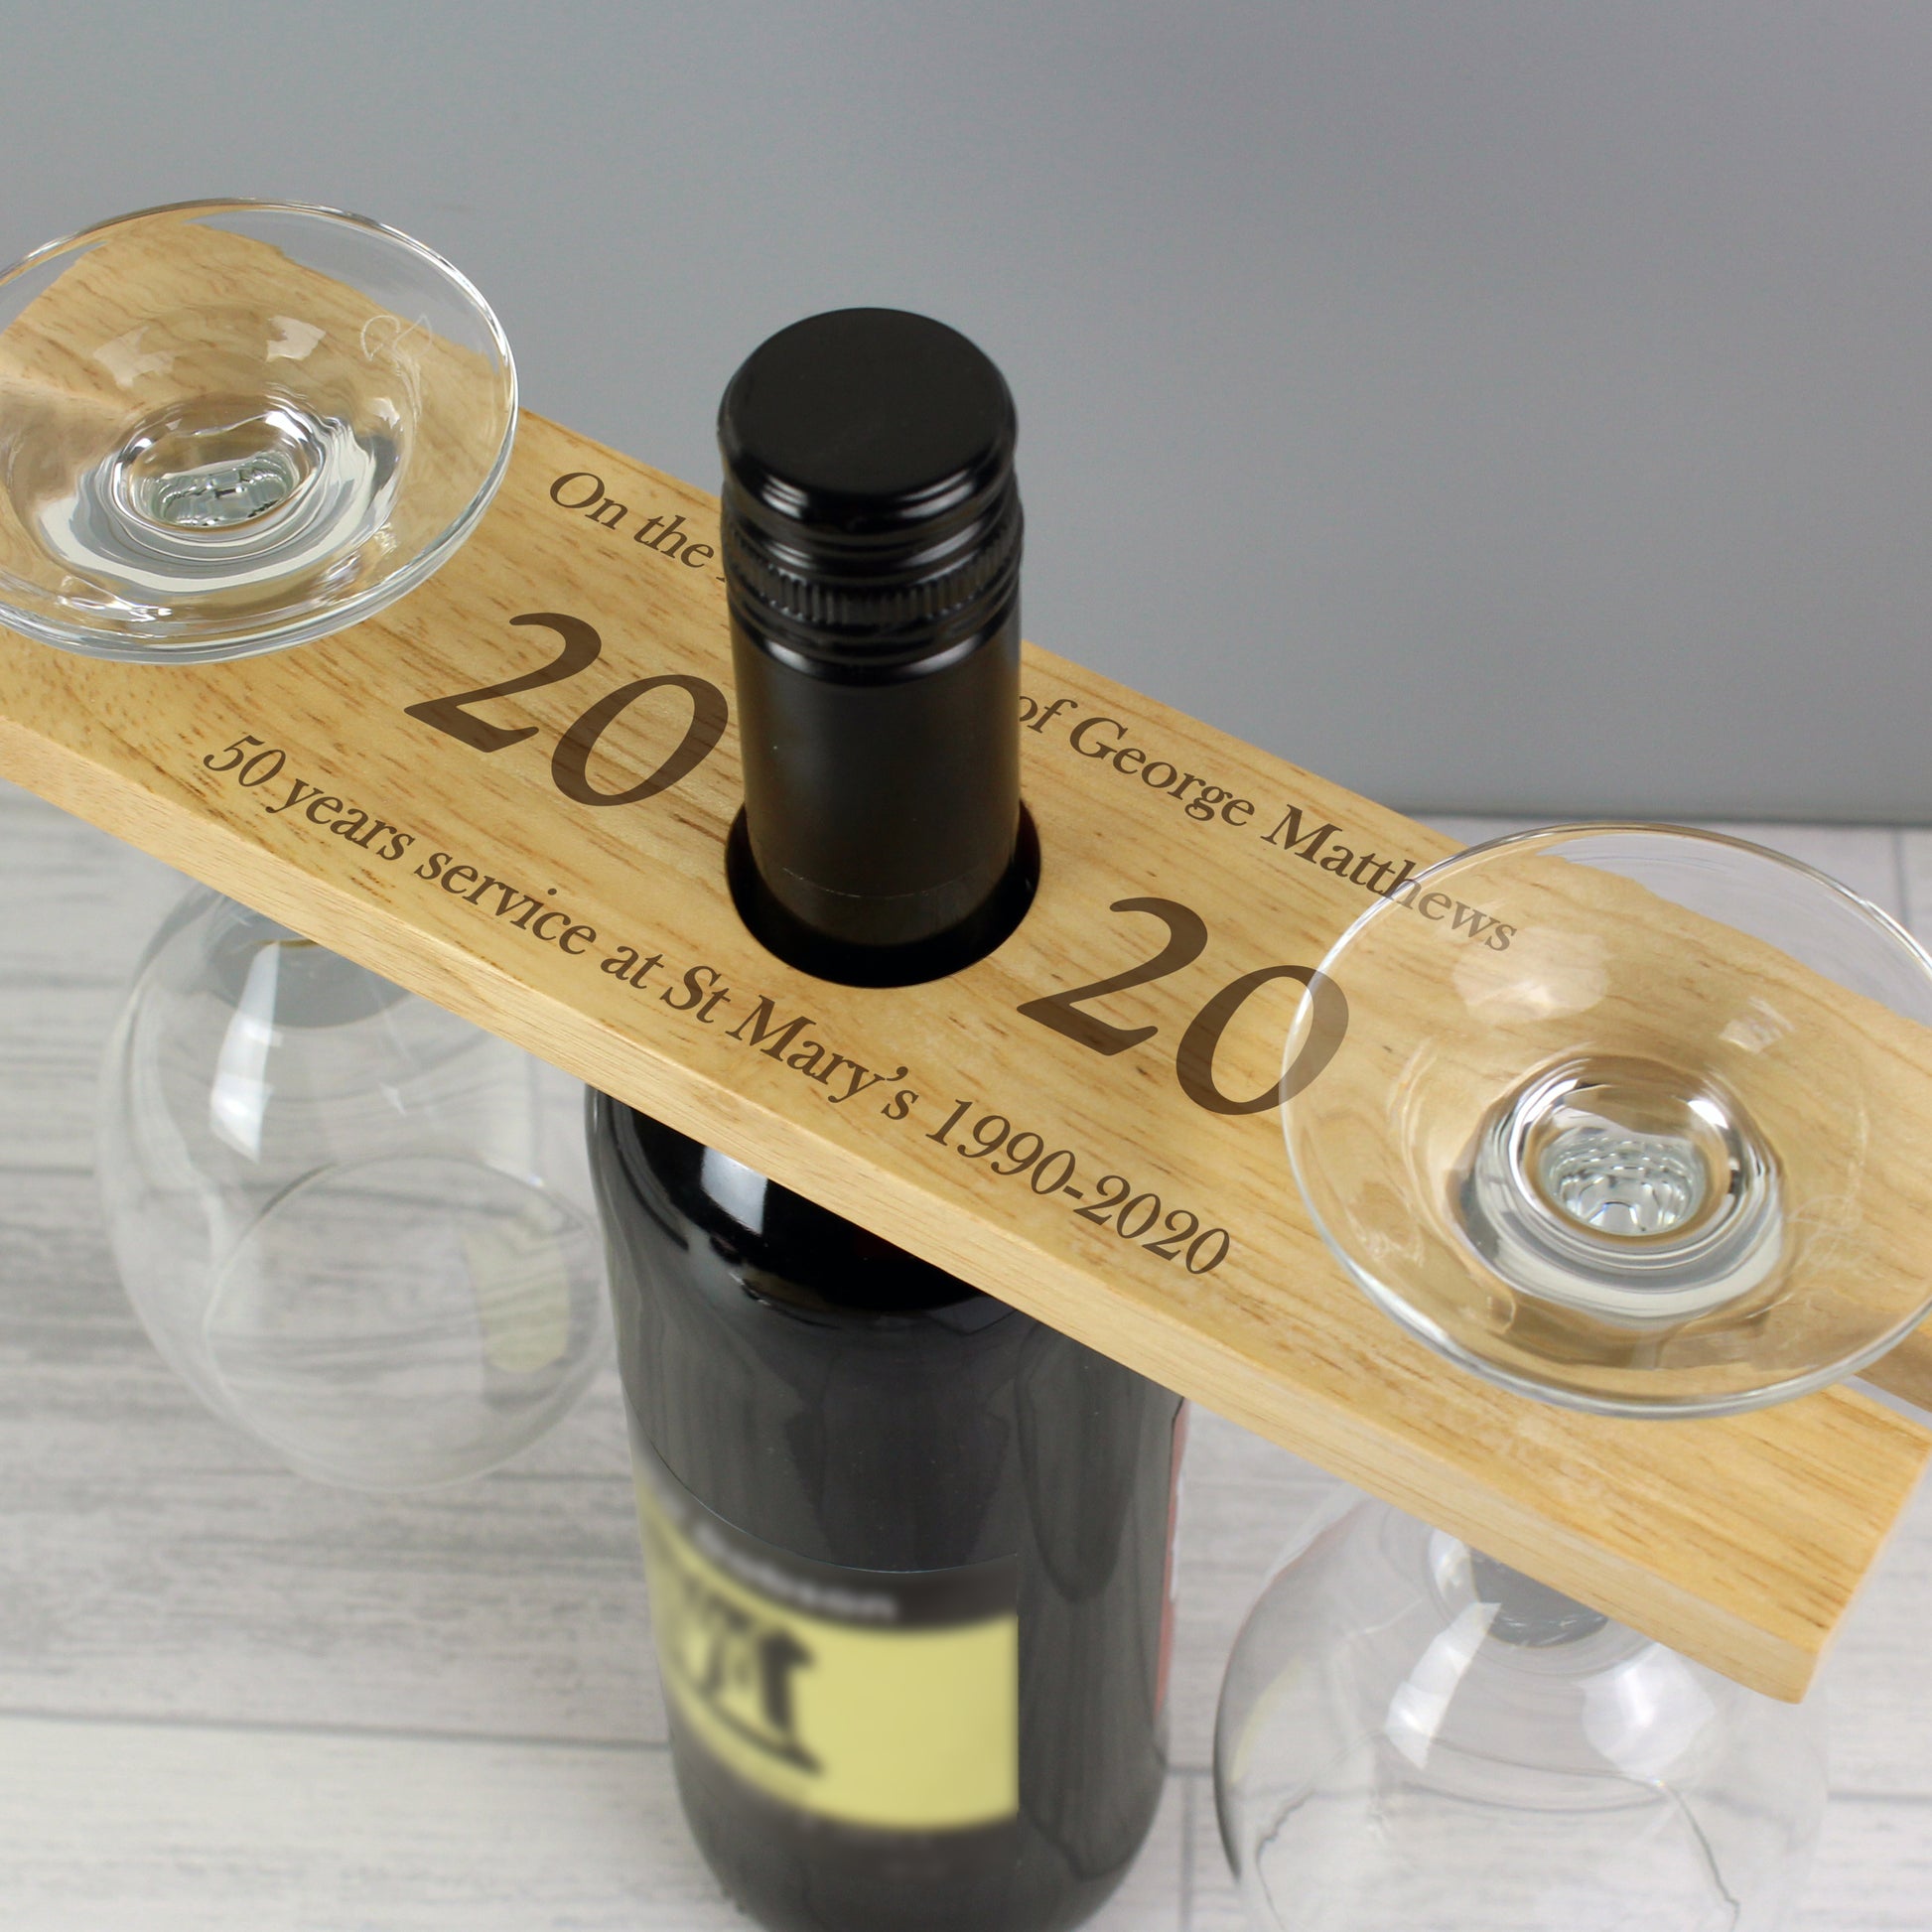 'Year' wine glass and bottle butler - Lilybet loves